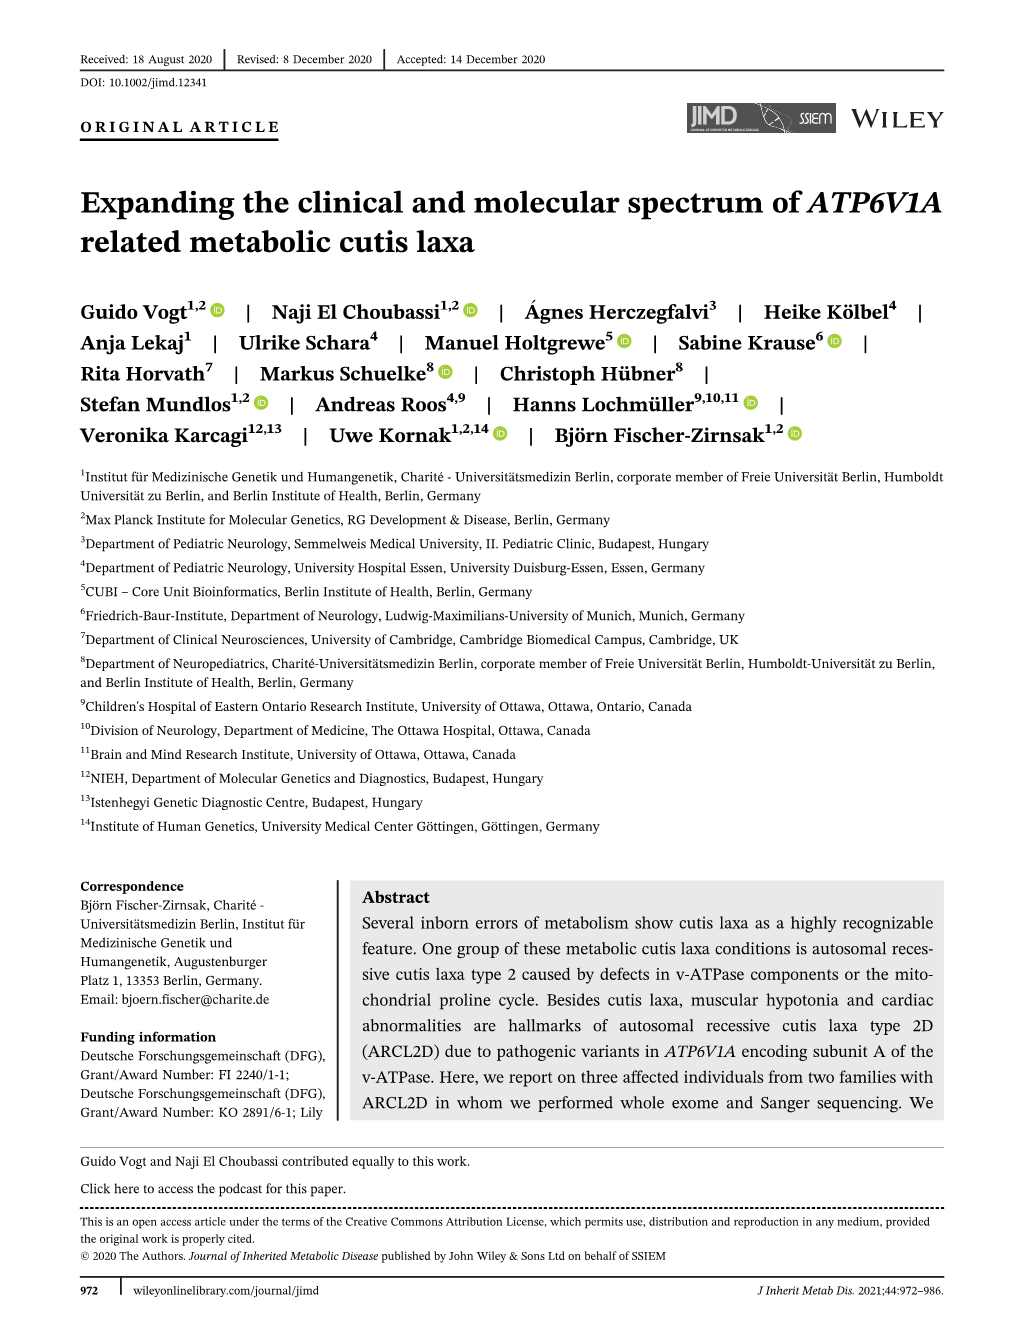 Expanding the Clinical and Molecular Spectrum Of€ATP6V1A€Related